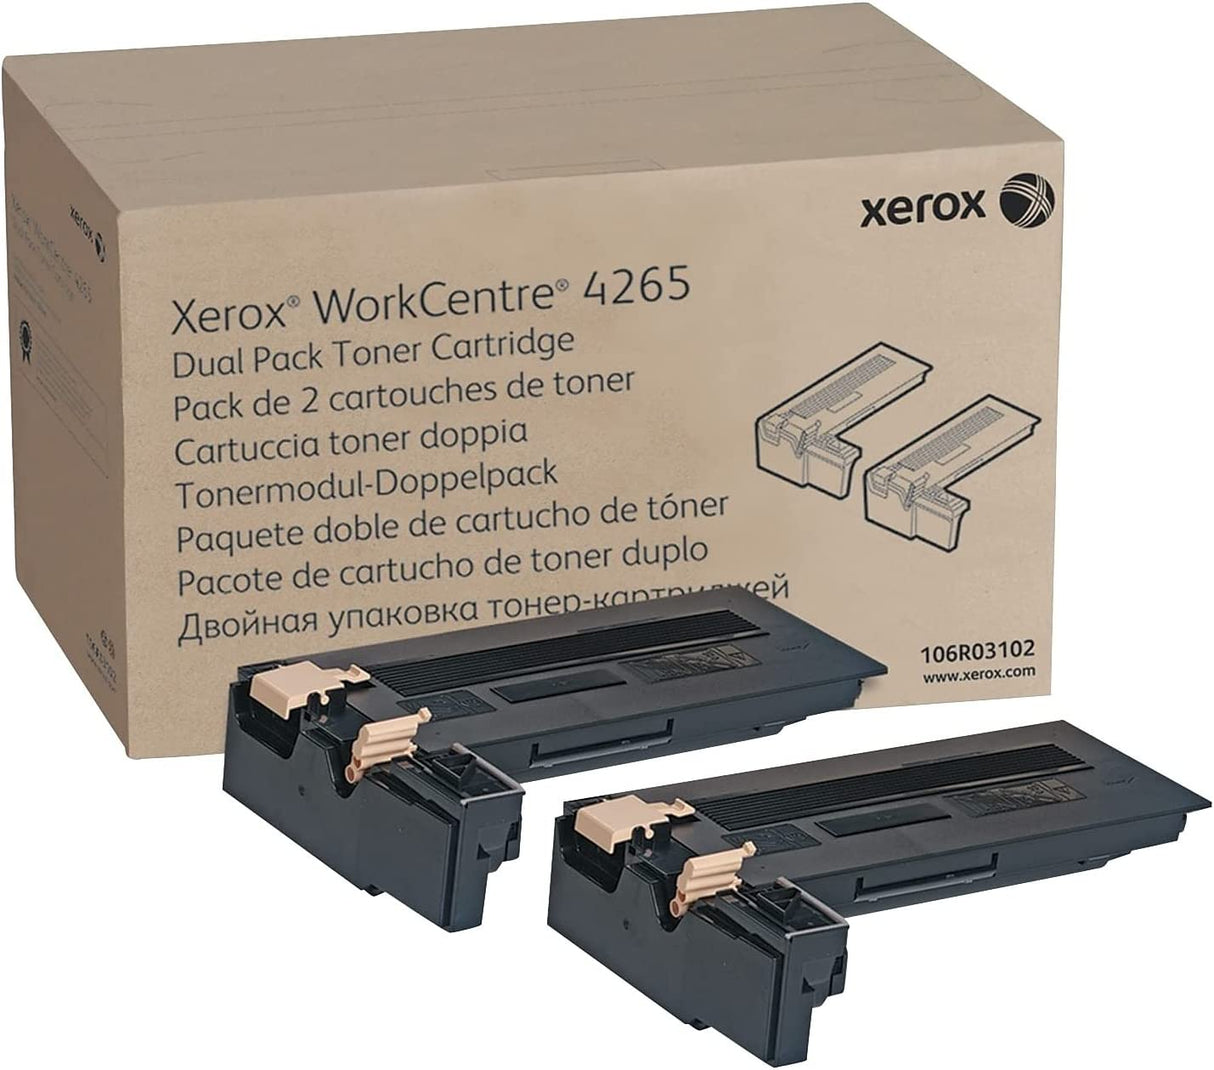 Xerox WorkCentre 4265 Black Toner-Cartridge - 2 Pack (50,000 Pages) - 106R03102 Standard Capacity